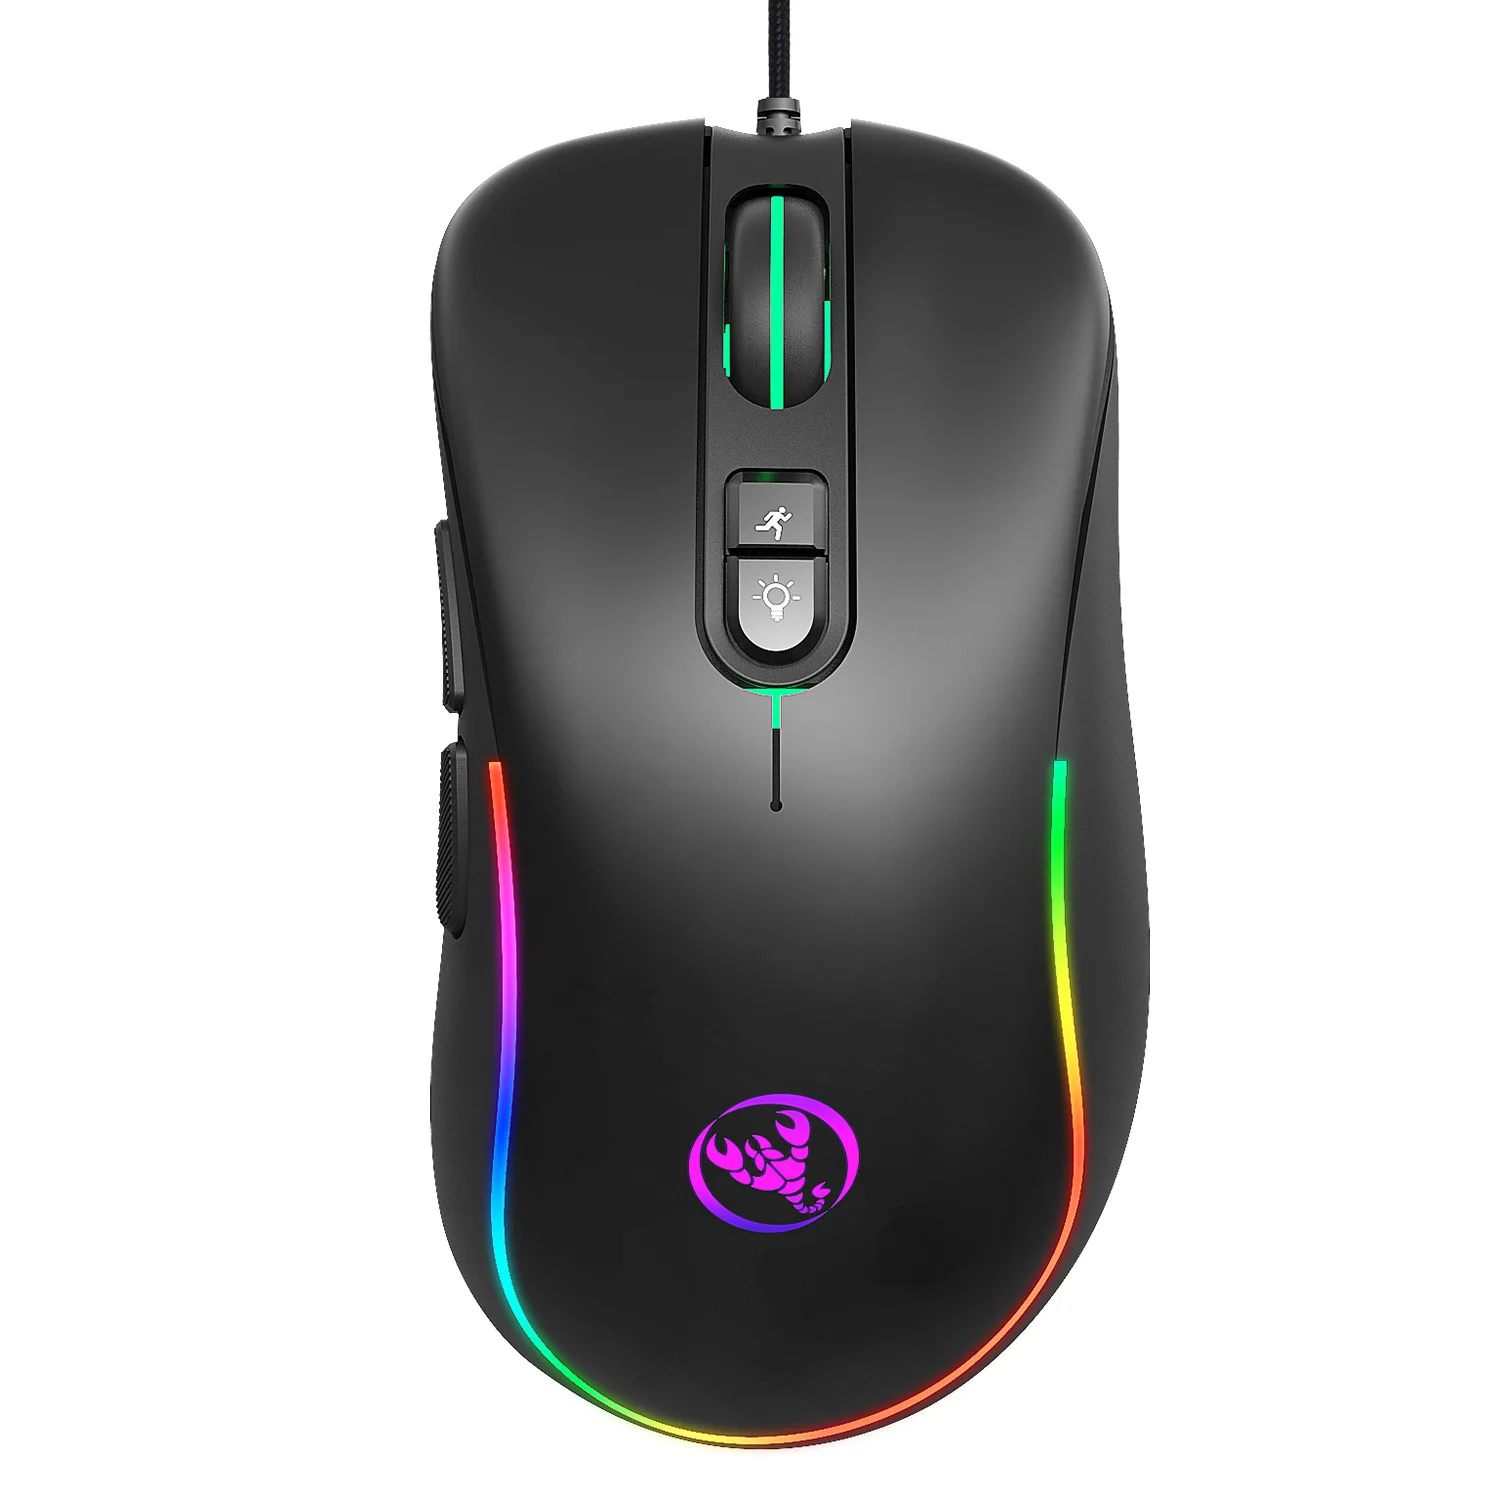 

Ergonomic LED RGB Wired Optical PC Gaming Mouse 6400 DPI Adjustable 7D All-key Computer Mouse